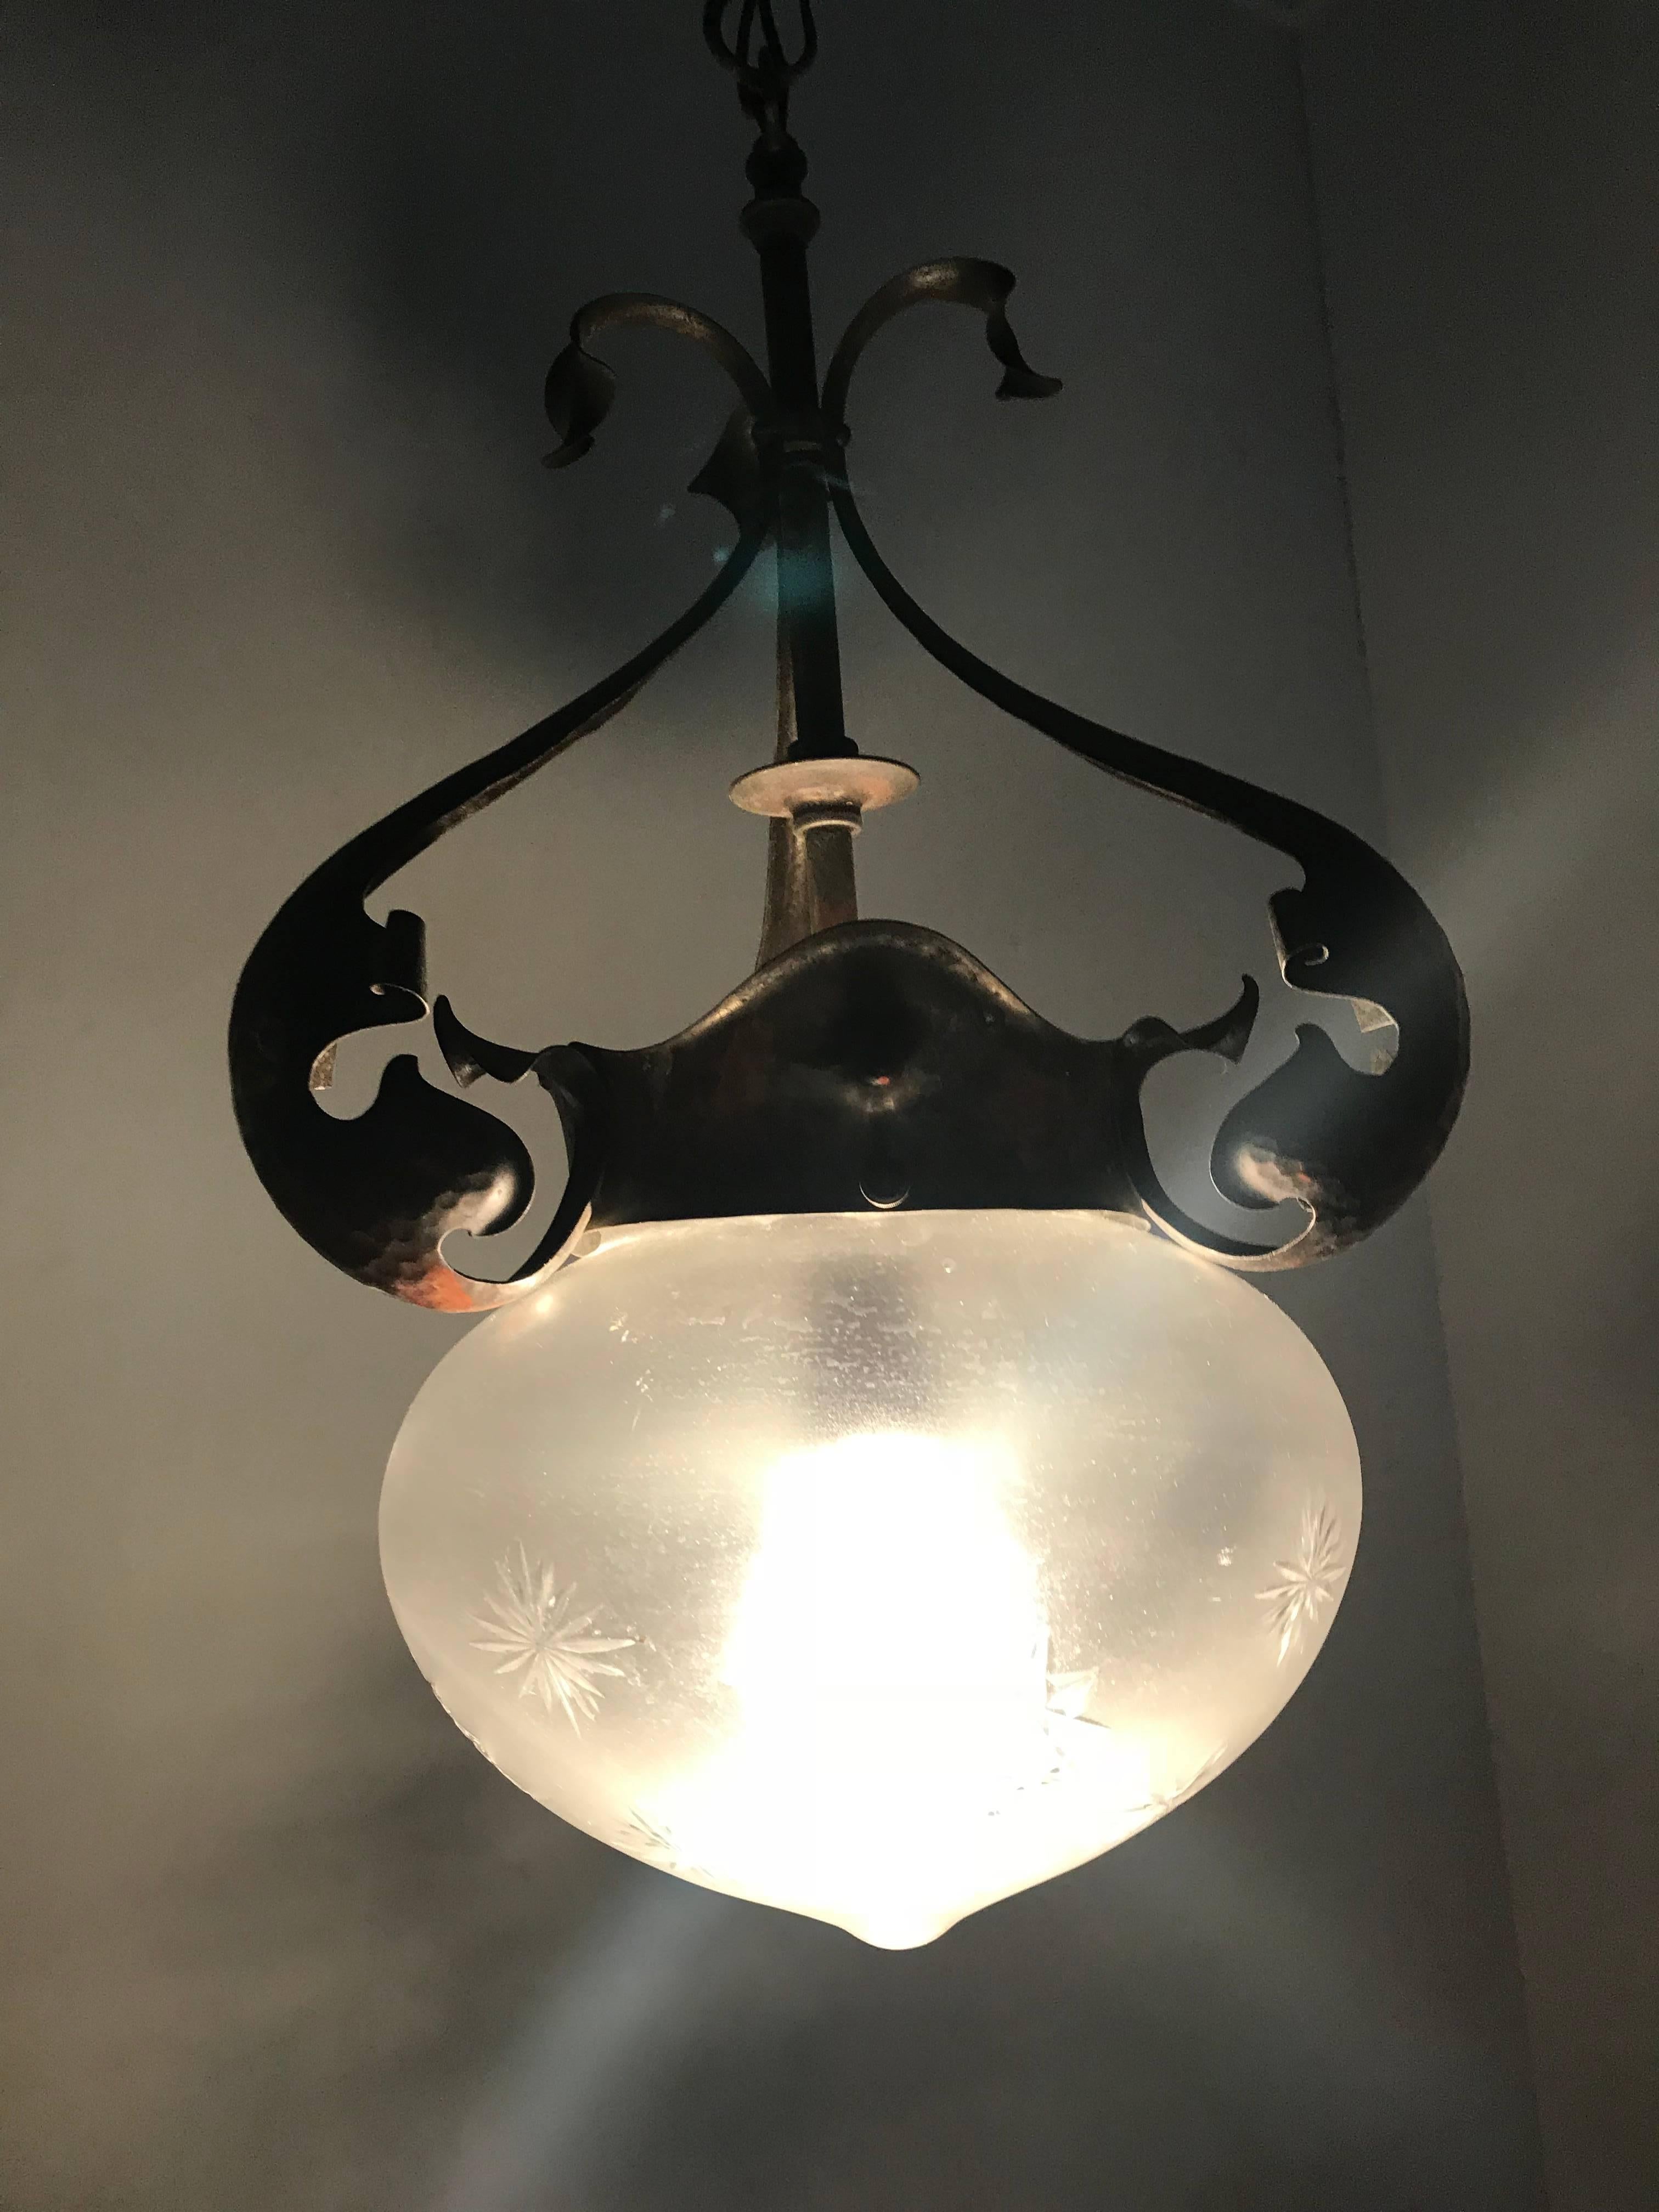 20th Century Antique and Great Design, Arts & Crafts Hammered Copper and Glass Pendant Light